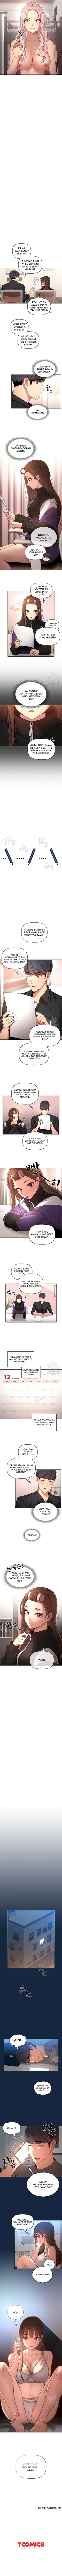 private-tutoring-in-these-difficult-times-chap-37-3